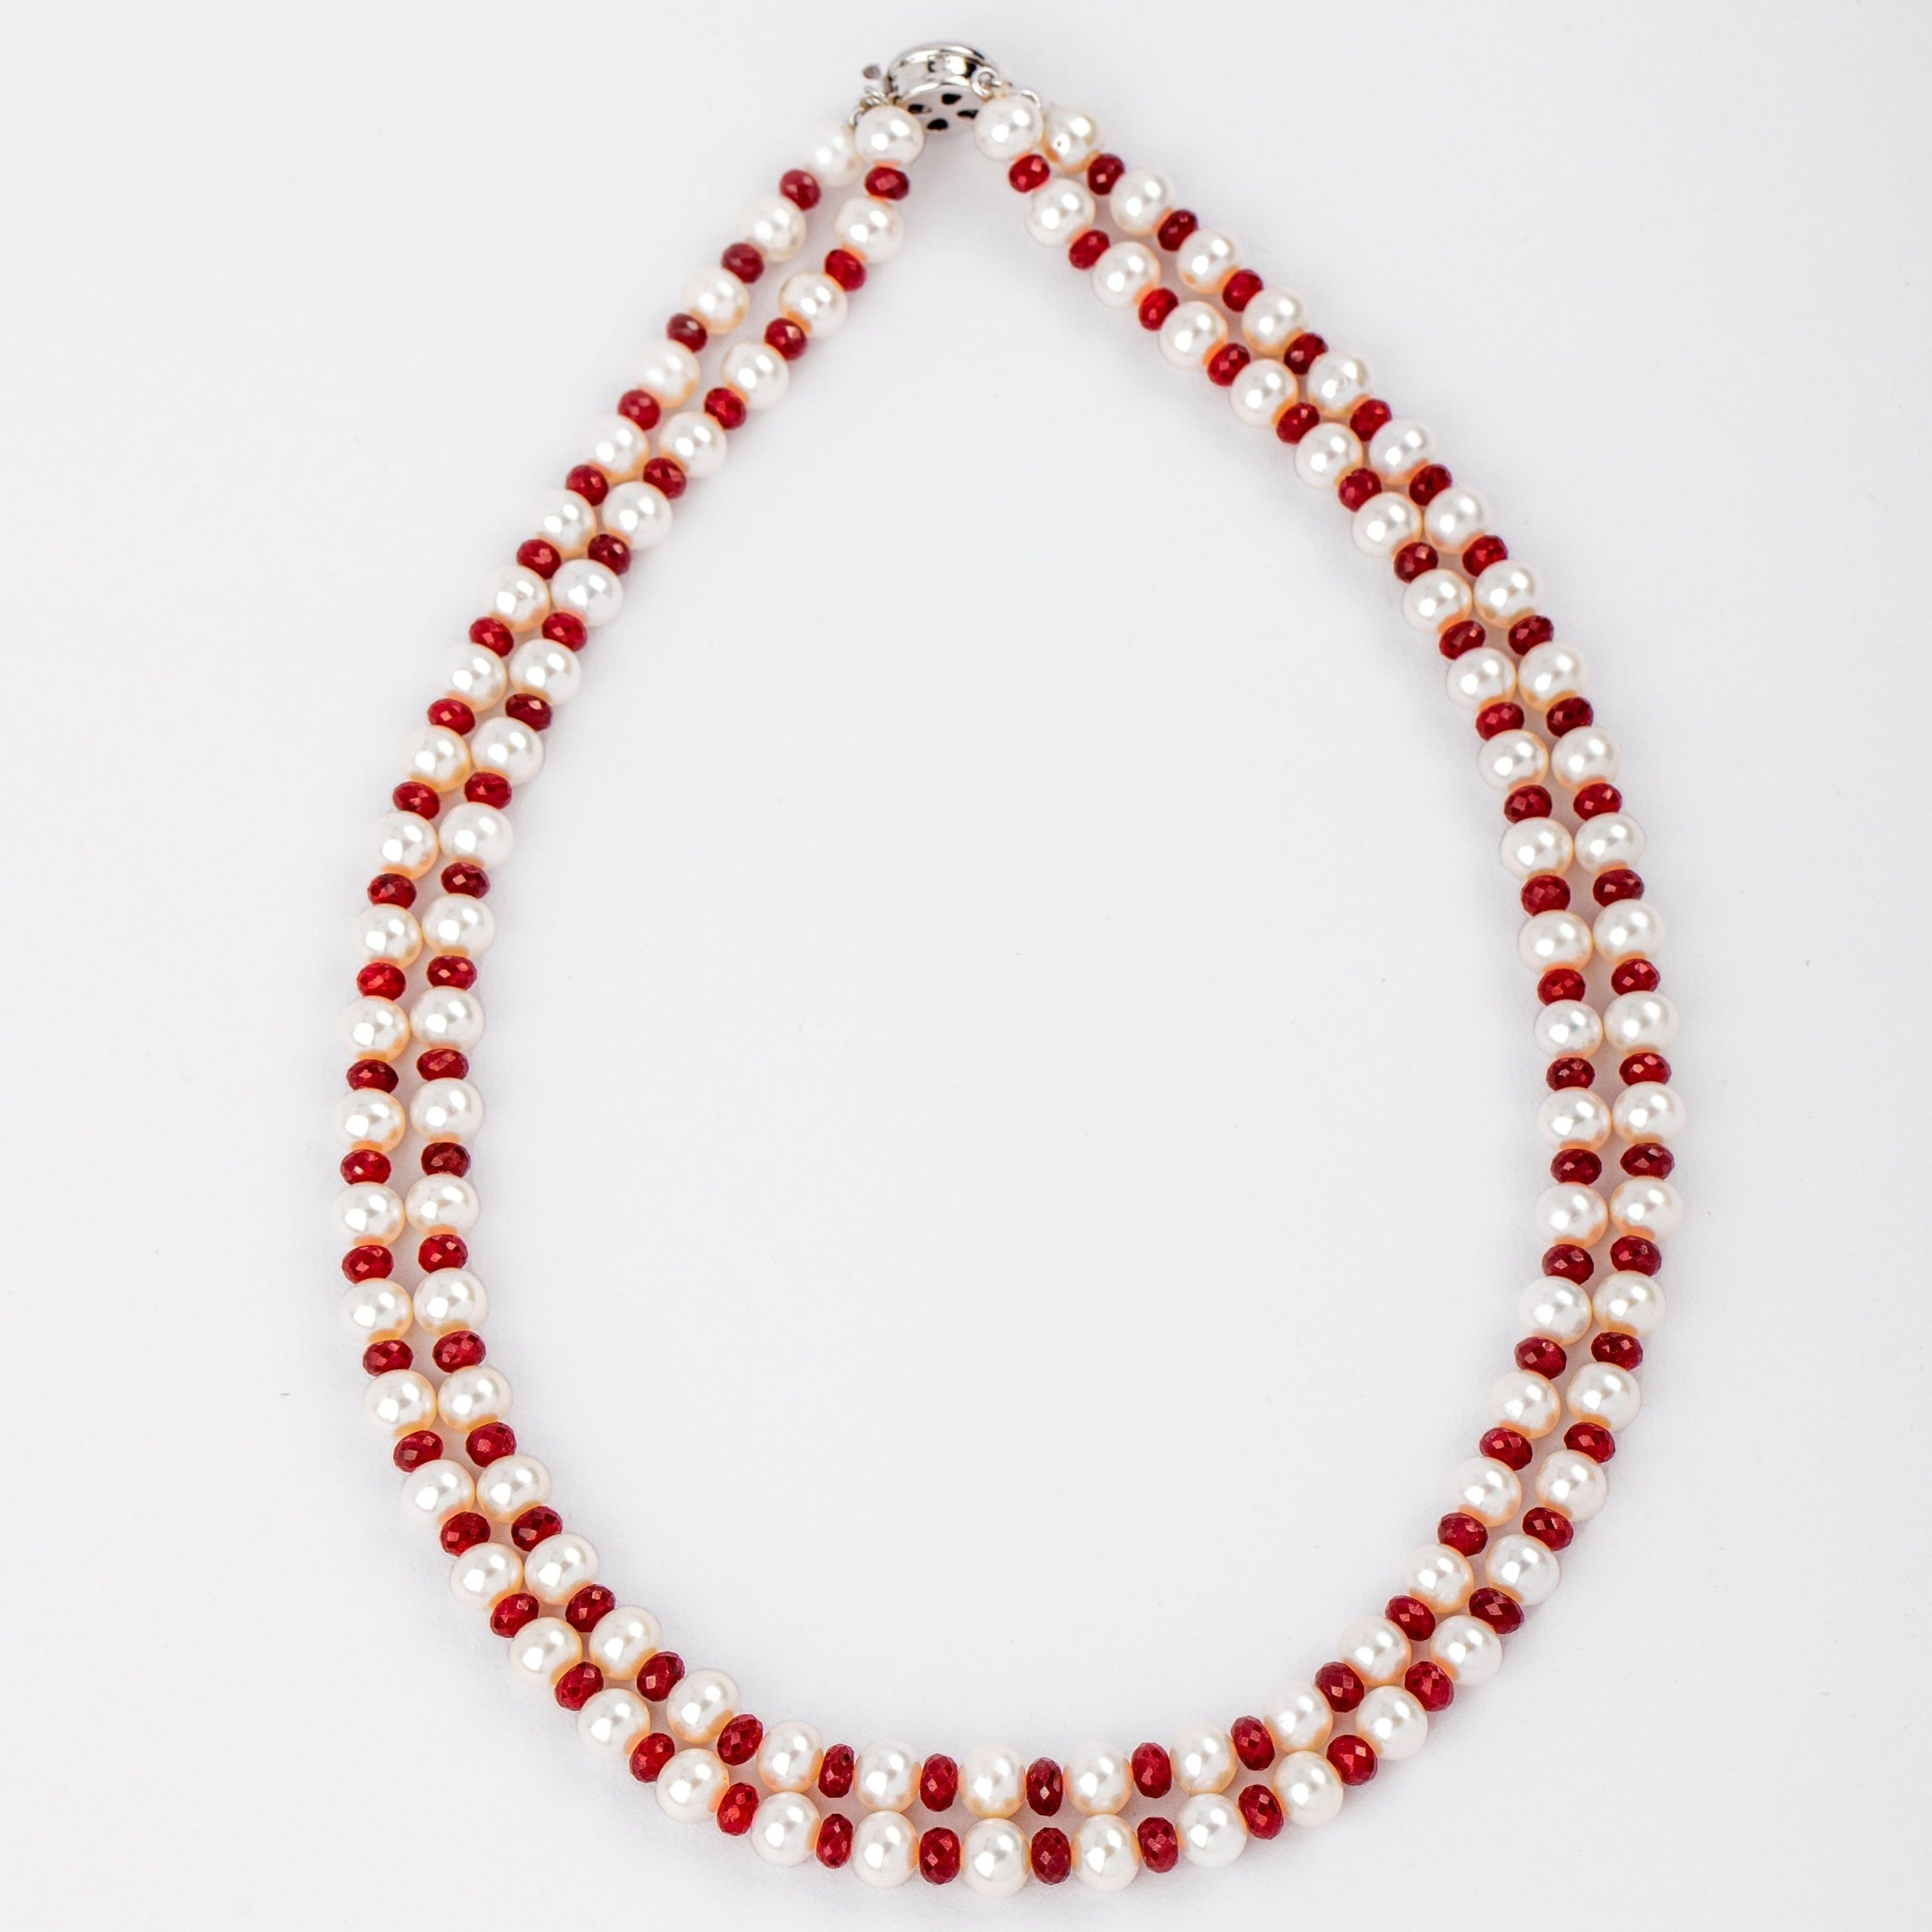 Scarlet Dreams freshwater Pearl and Ruby Necklace